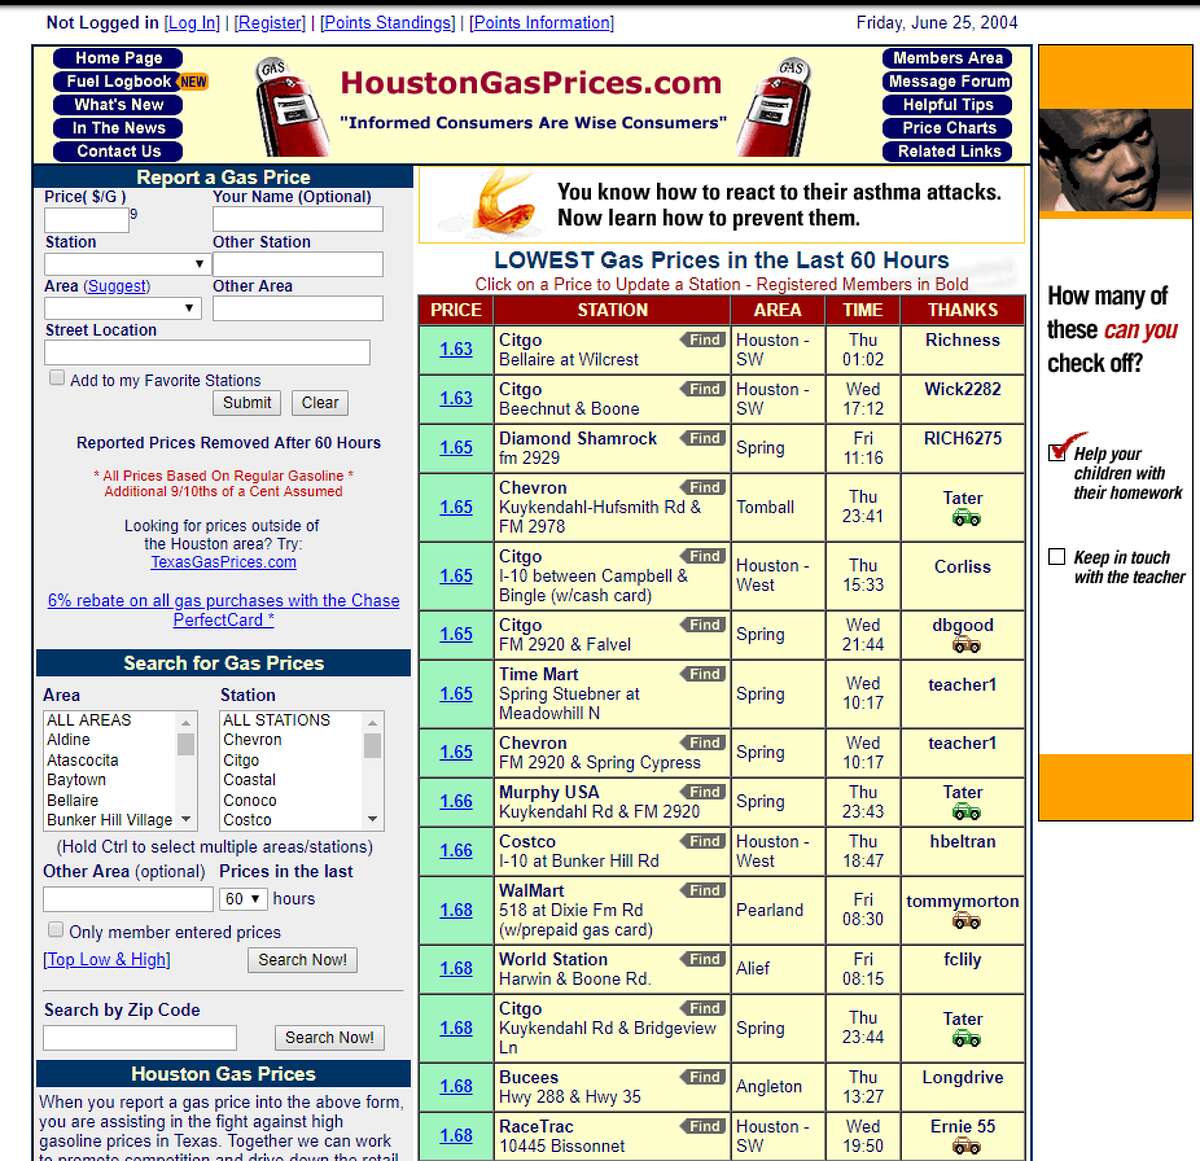 Houston Gas Prices  Website: www.houstongasprices.com  Screen capture date: June 25, 2004